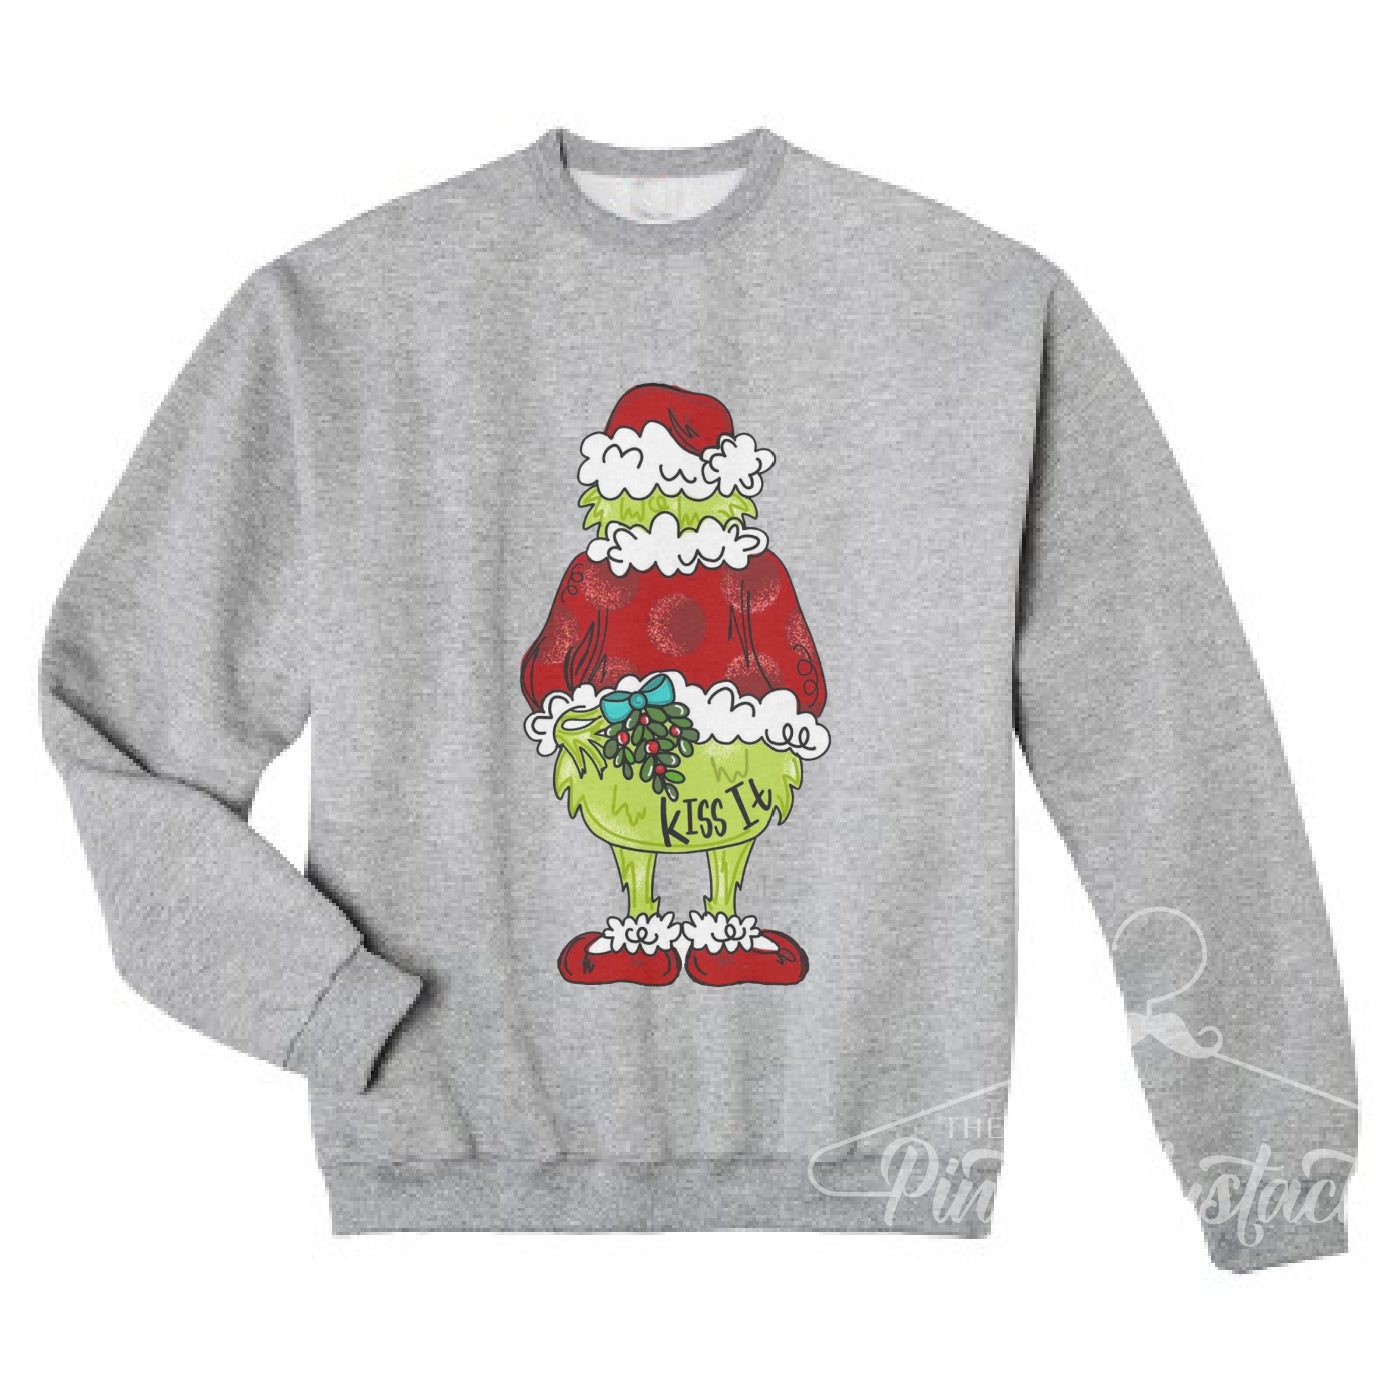 Comfort Colors, Gildan, or Bella Canvas Kiss It - You're A Mean One Funny Christmas - Youth and Adult Sizes